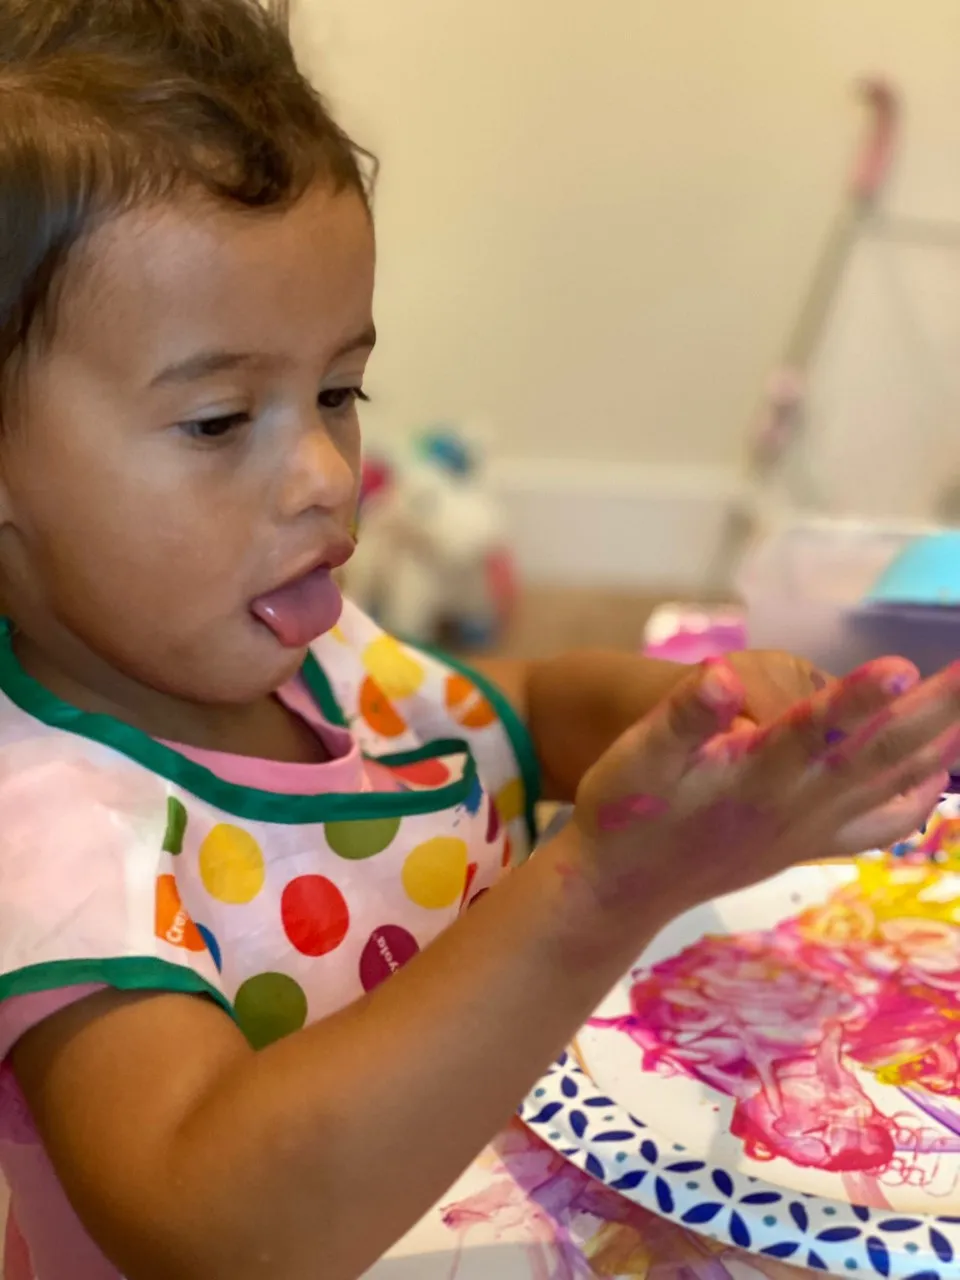 Toddler finger painting with multiple colors